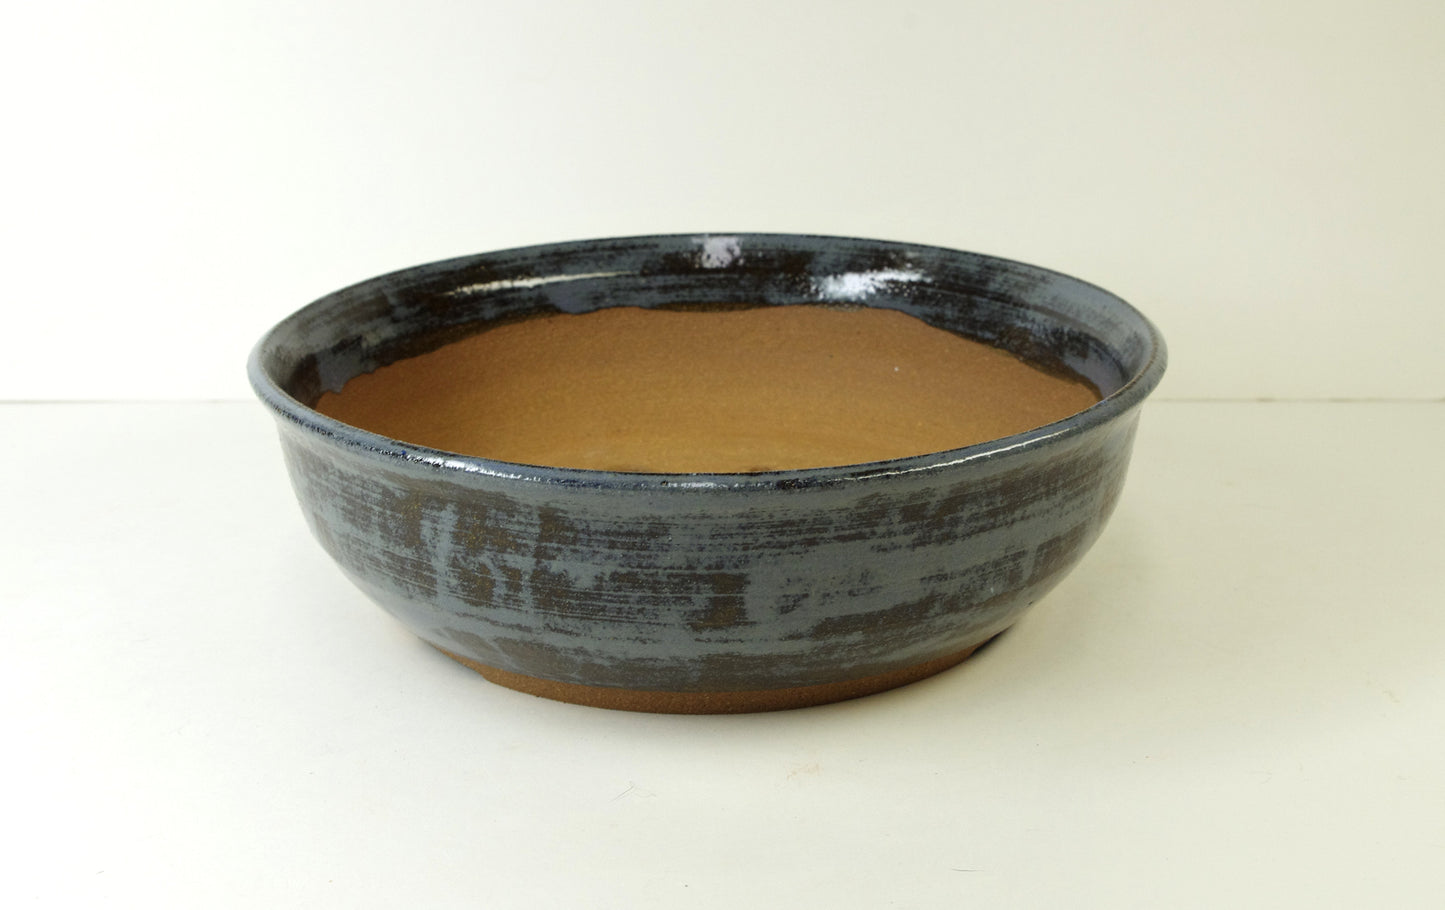 2041, Hand Thrown Stoneware Bonsai Pot, Blues, Browns 7 7/8 x 2 1/2 with extra wire holes